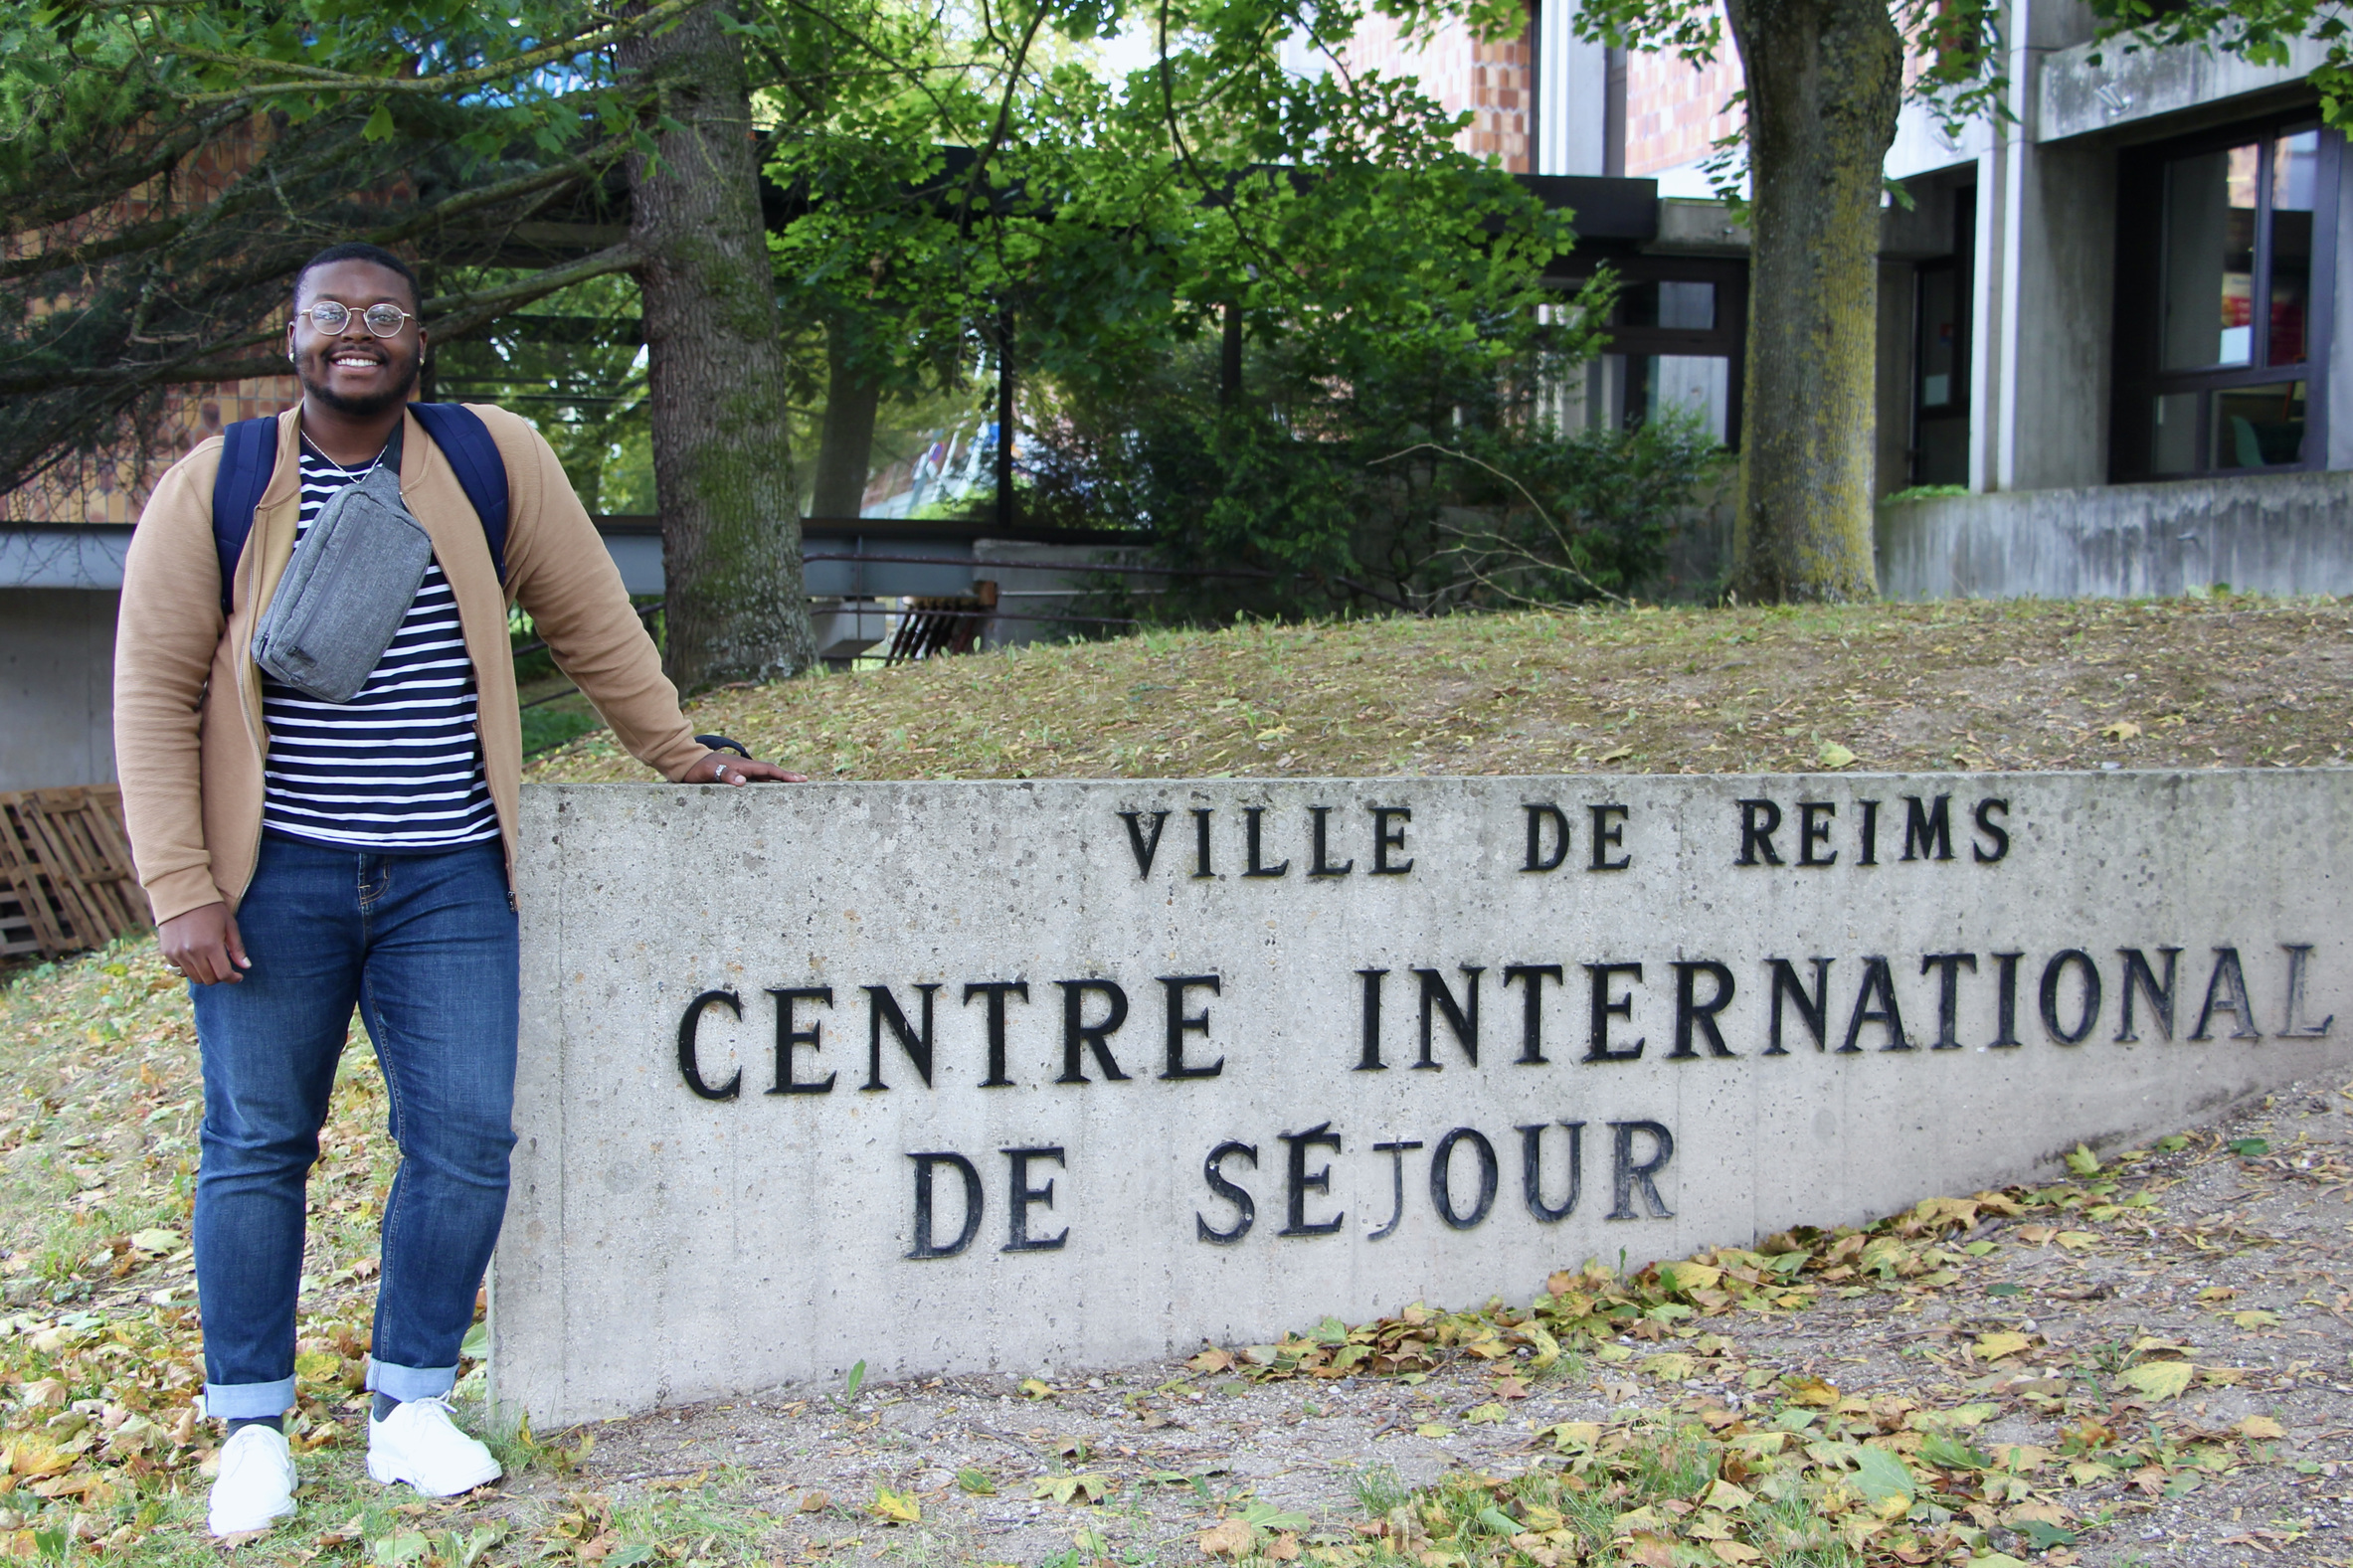 Jalen poses at the CIS in Reims, France wearing a striped shirt.